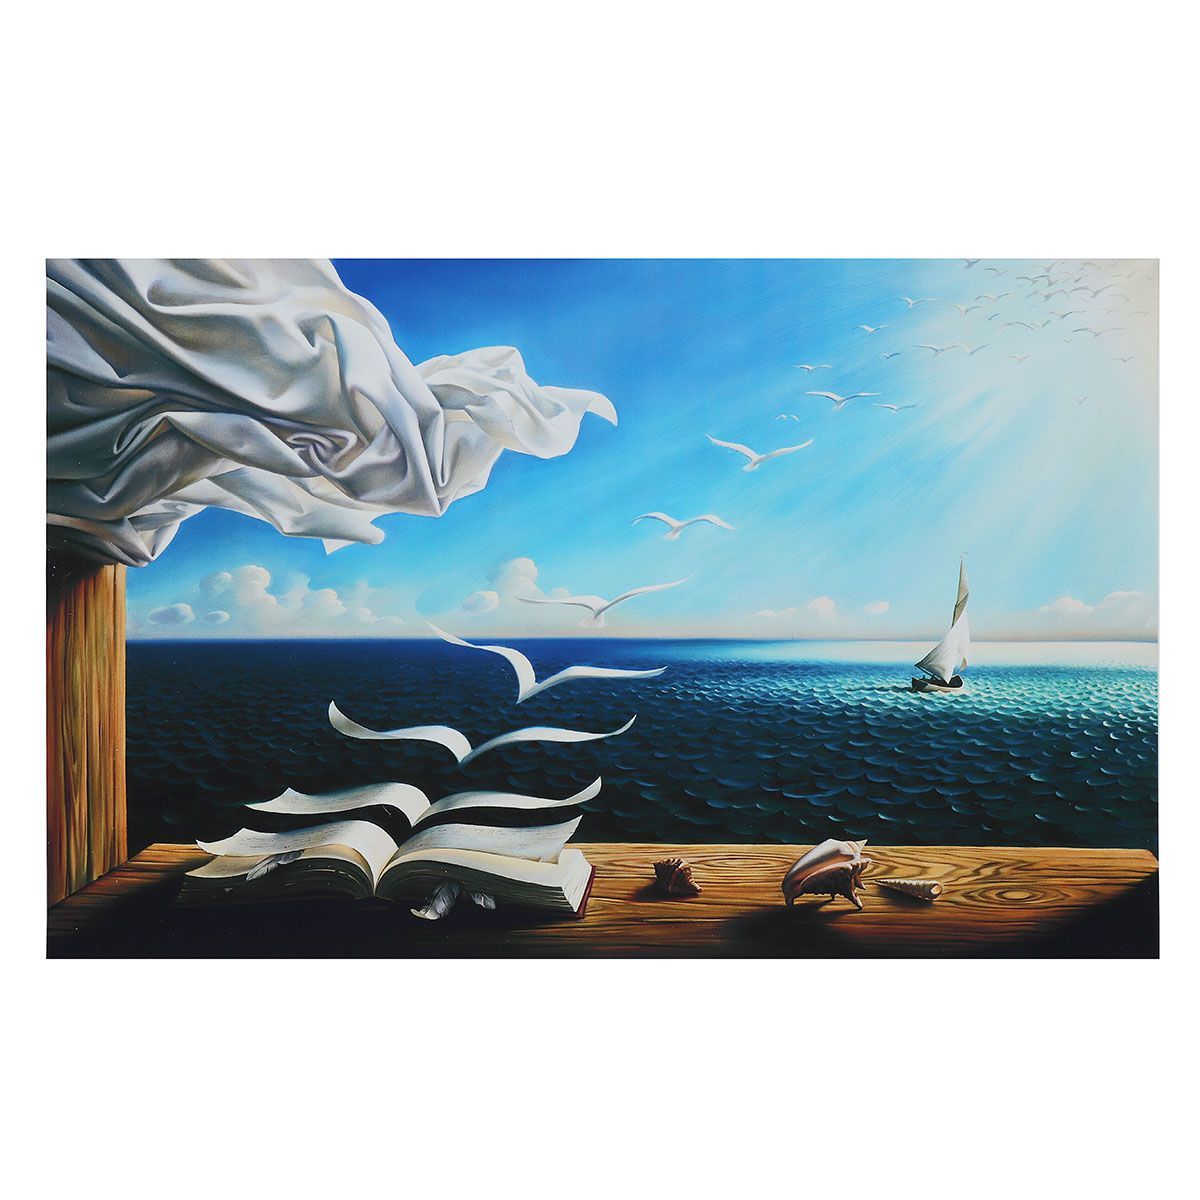 Modern-Sea-Canvas-Print-Painting-Poster-Wall-Mount-Art-Unframed-Picture-Home-Decorations-1465368